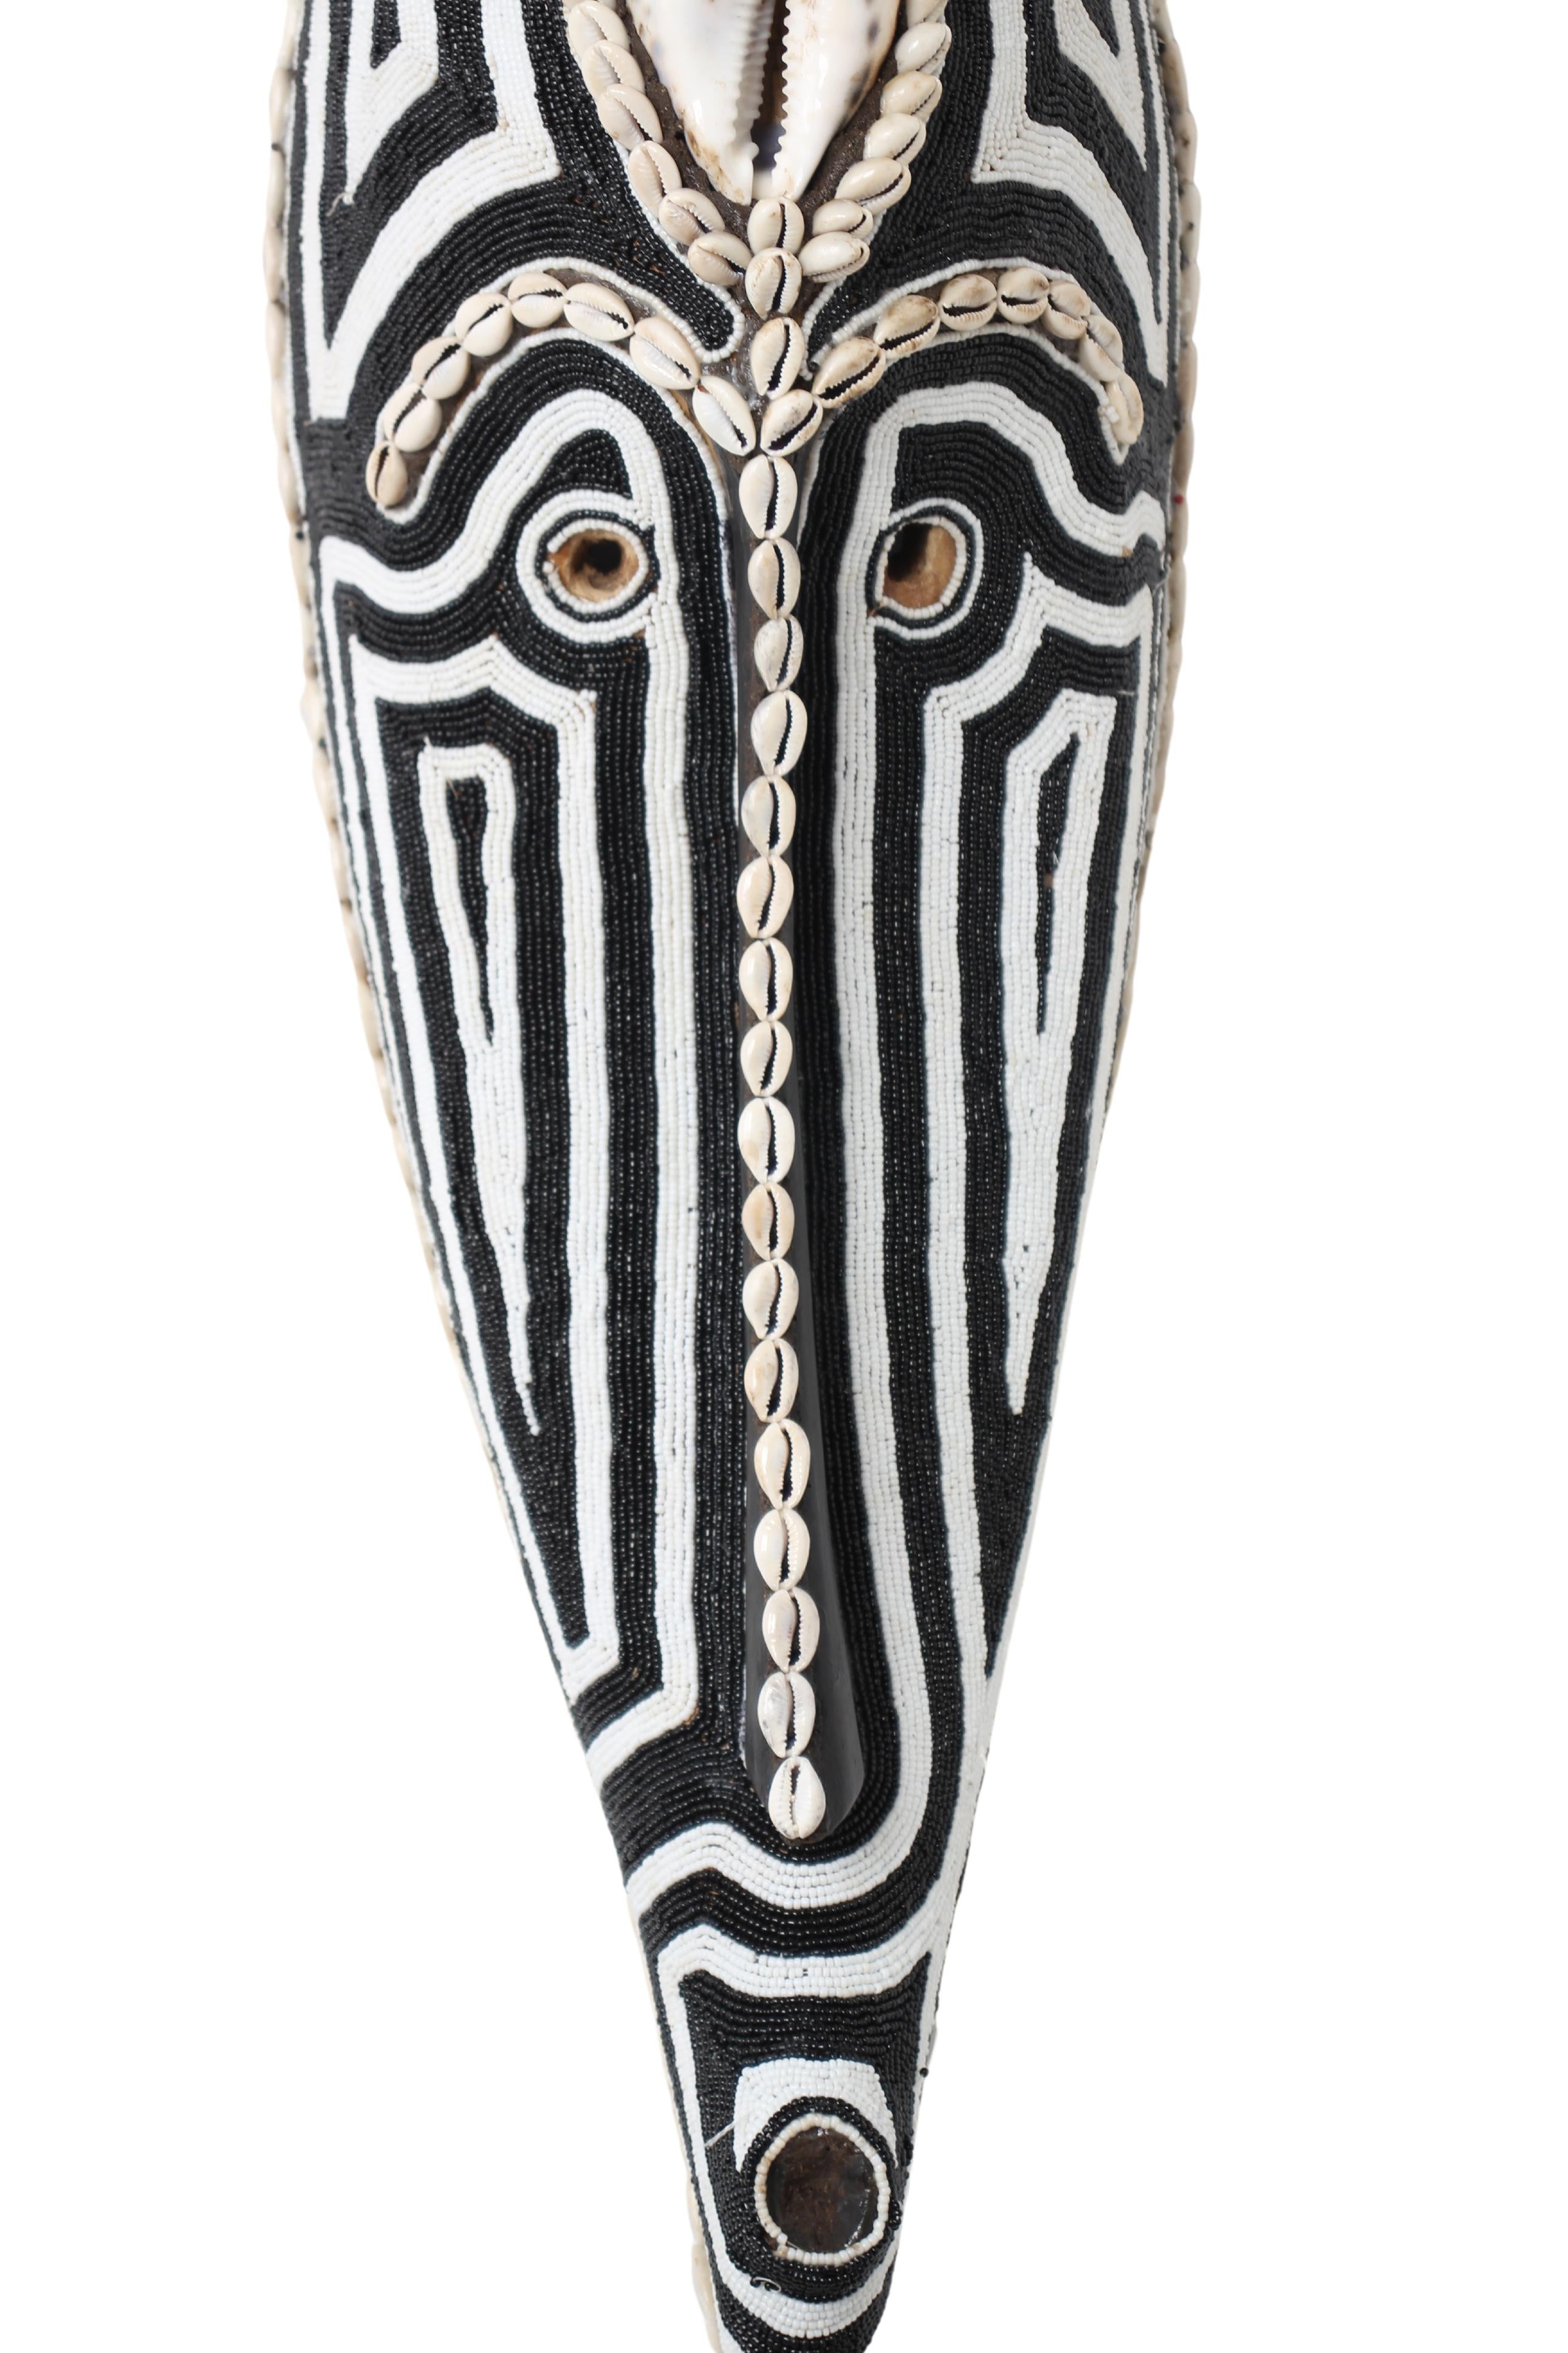 Fang Tribe Beaded Mask ~27.6" Tall (New 2024)